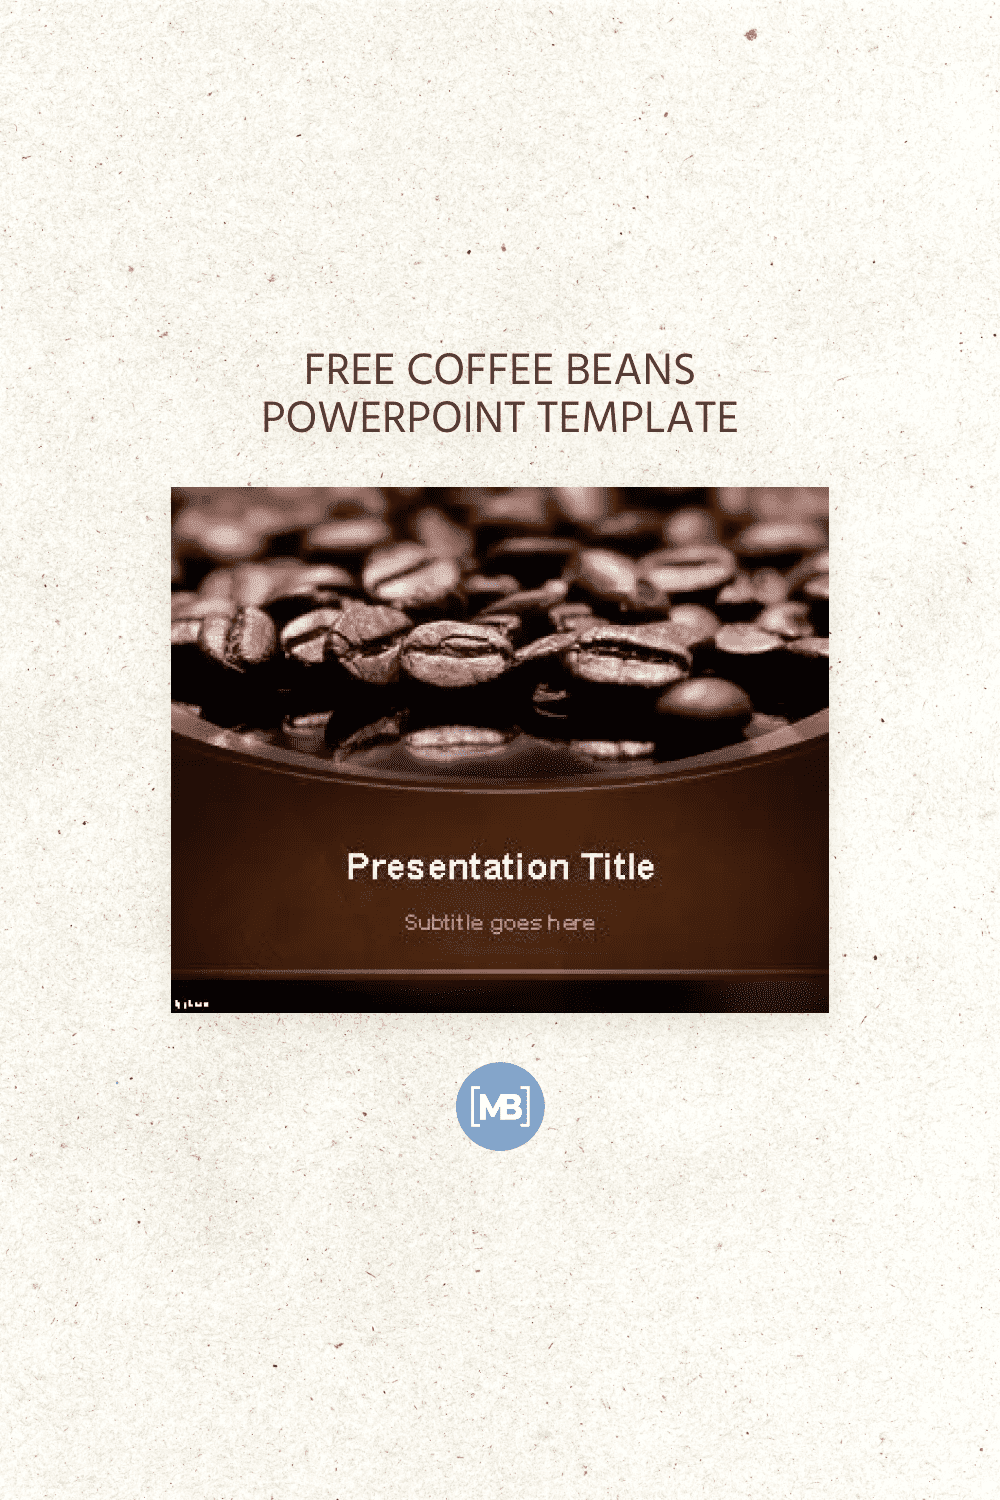 Coffee beans powerpoint template.